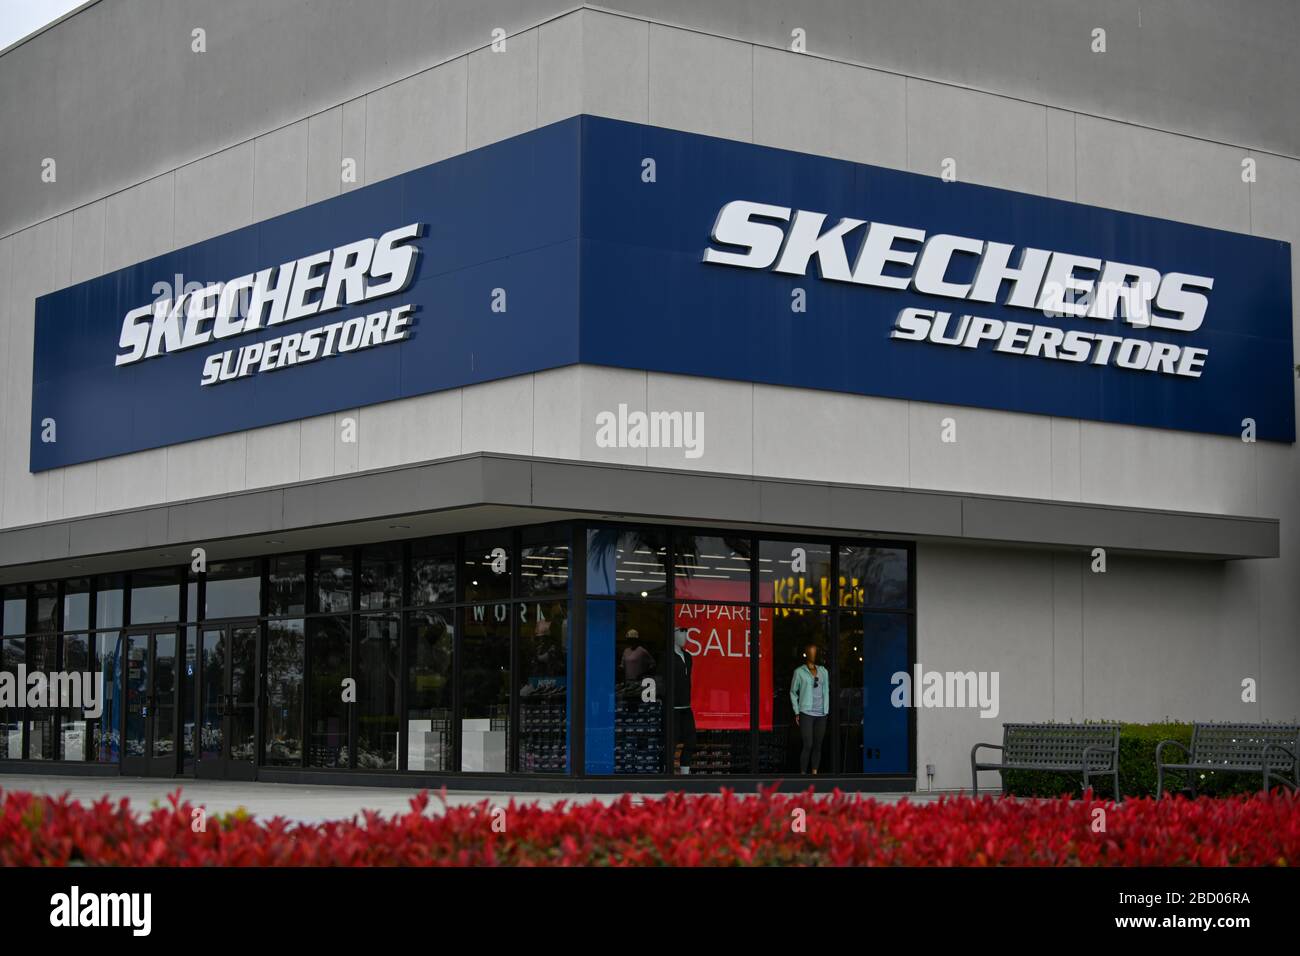 General overall view of the Skechers Superstore inside the Ontario Mills mall, Saturday, April 4, 2020, in Ontario, California, USA. (Photo by IOS/Espa-Images) Stock Photo